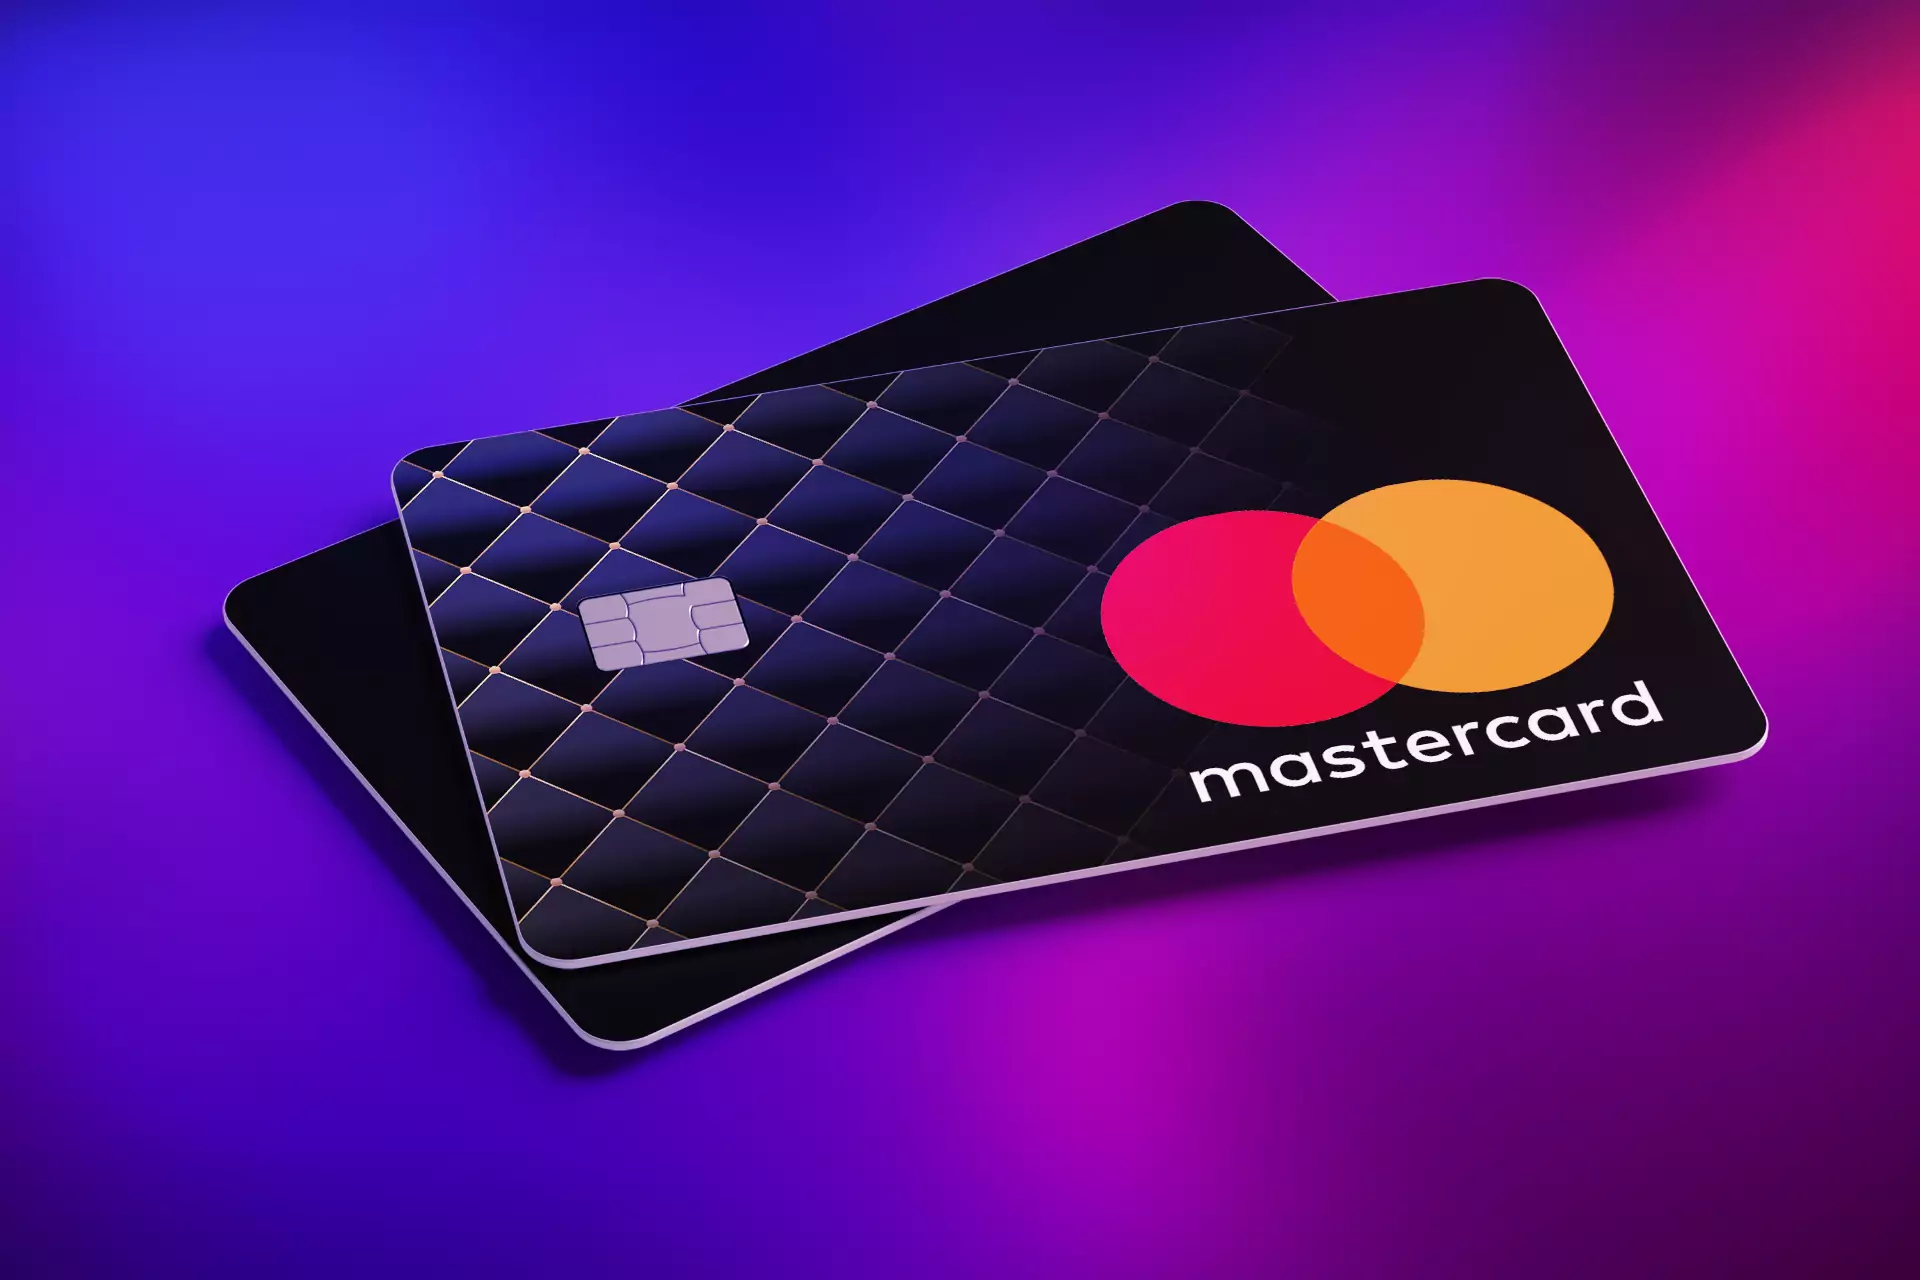 Mastercard is another well-respected payment system that has lots of users all over the world.